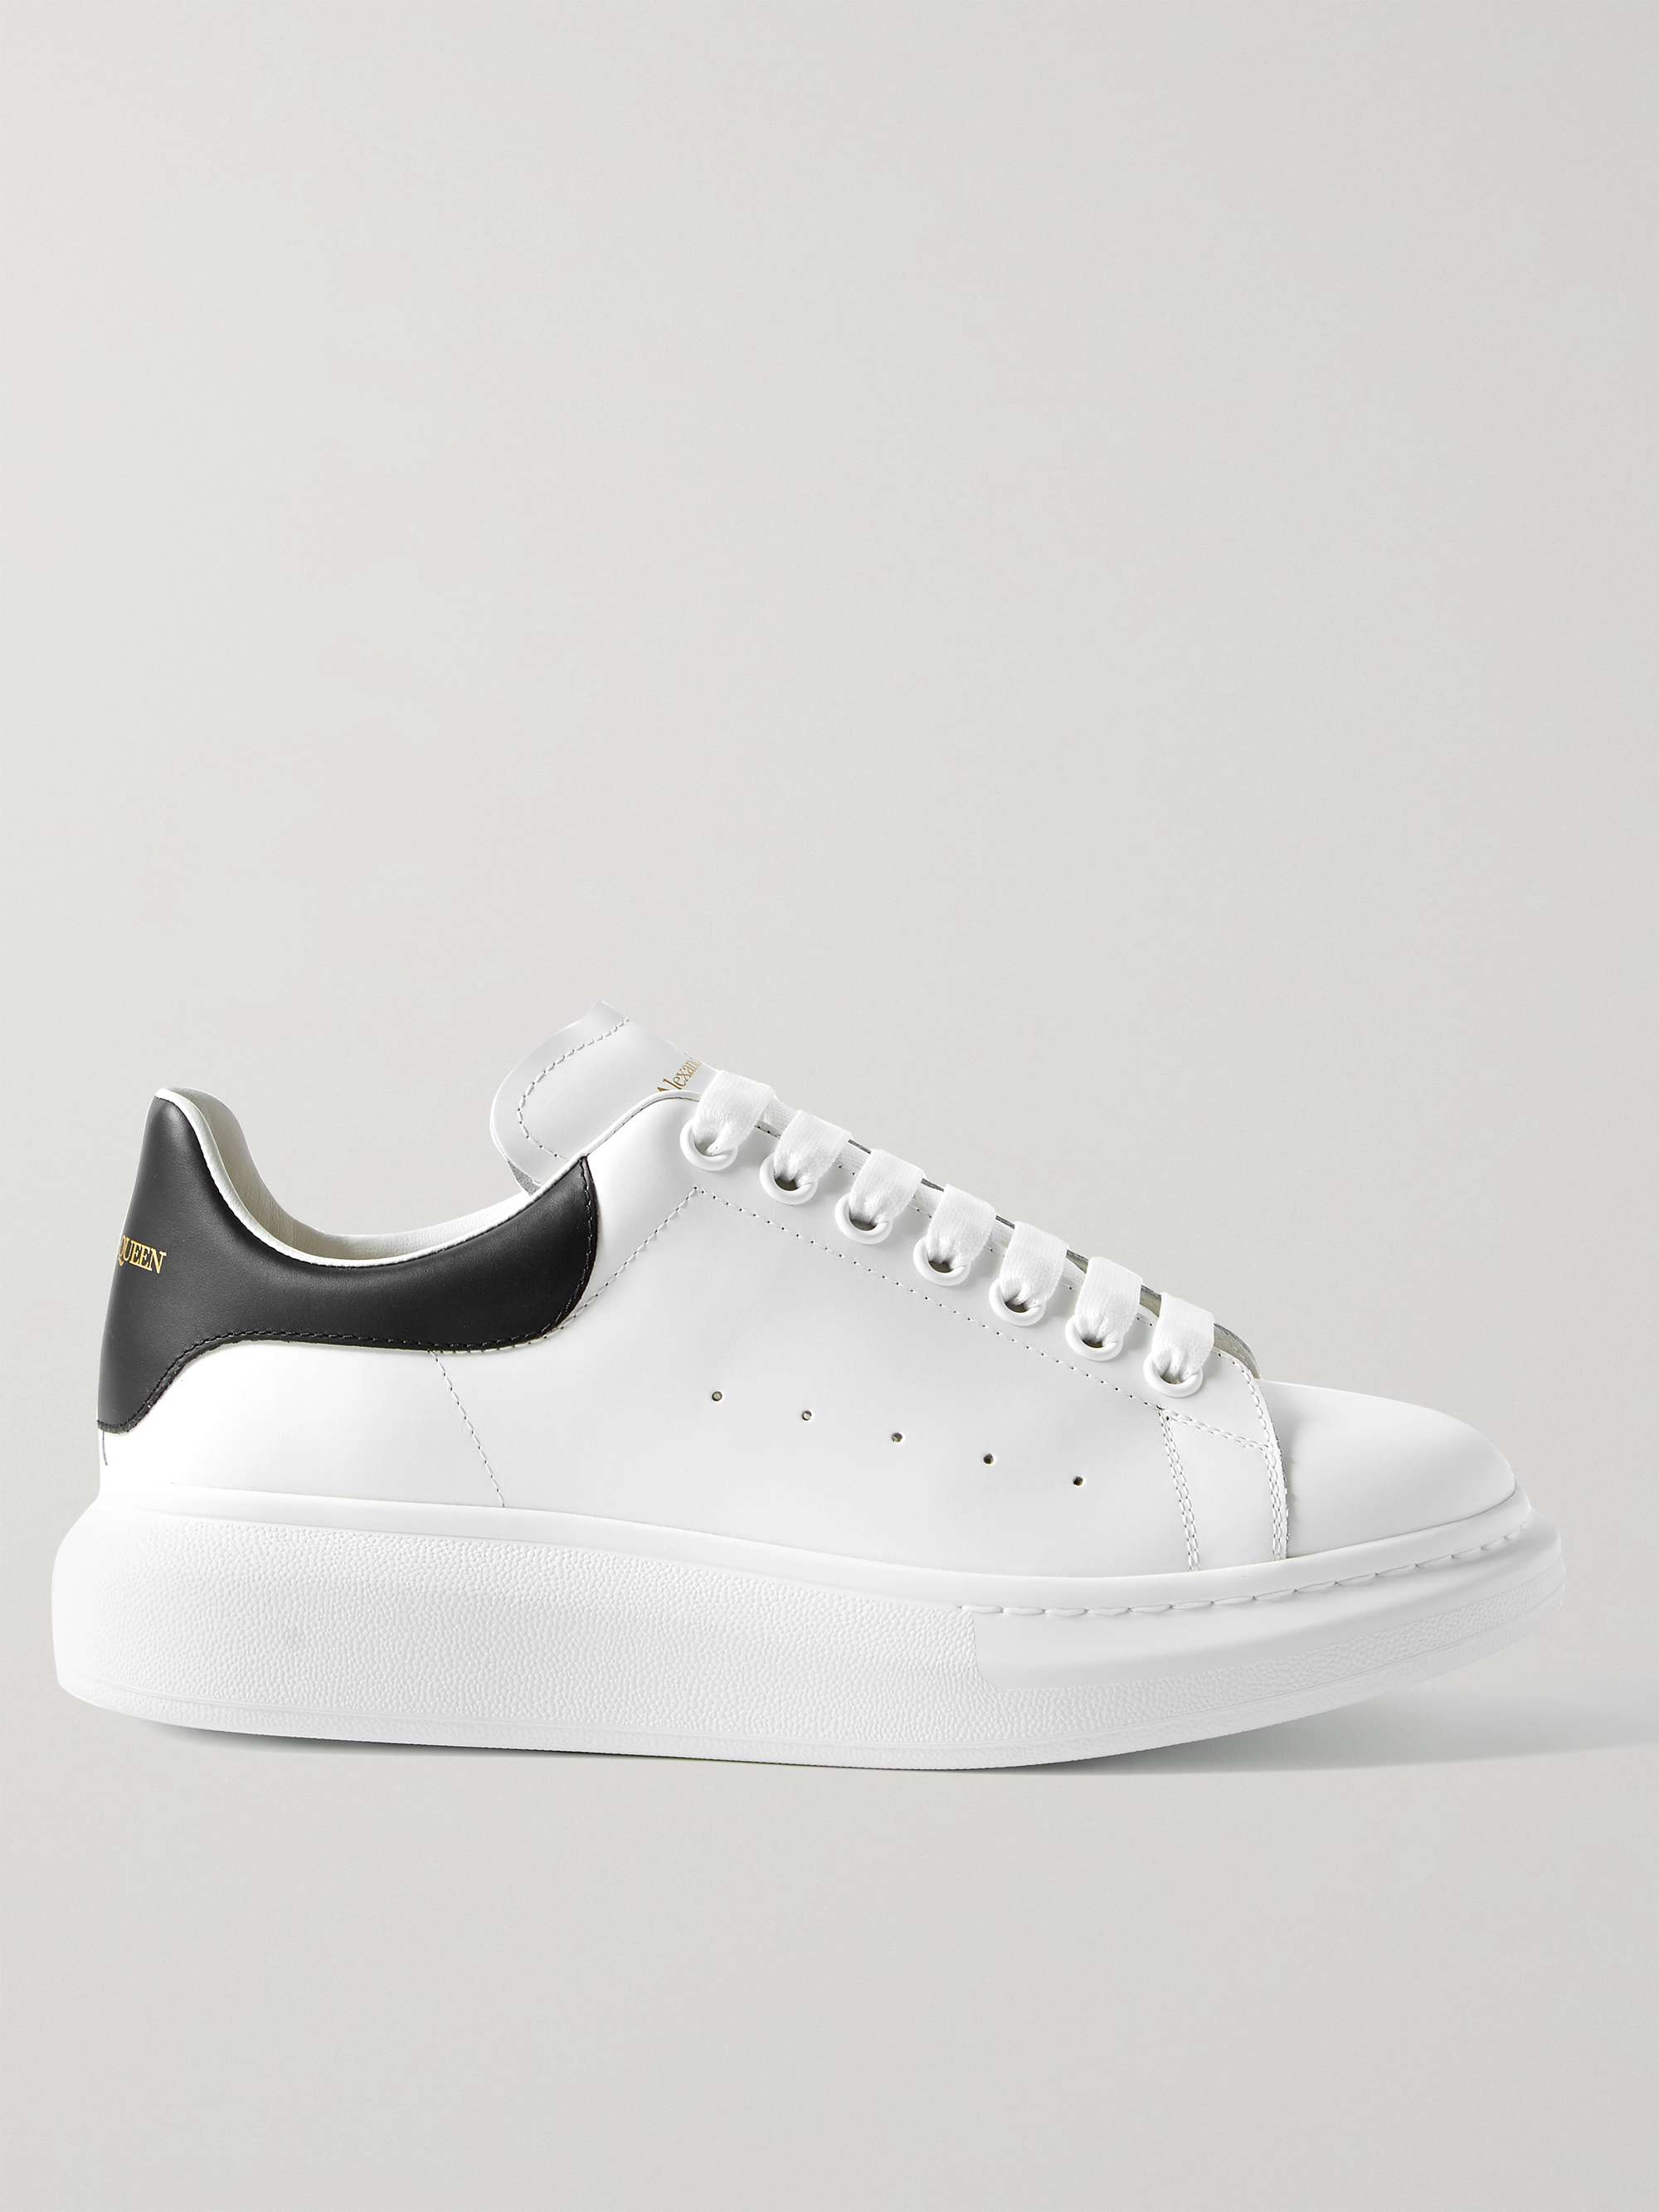 ALEXANDER MCQUEEN Exaggerated-Sole Leather Sneakers for Men | MR PORTER